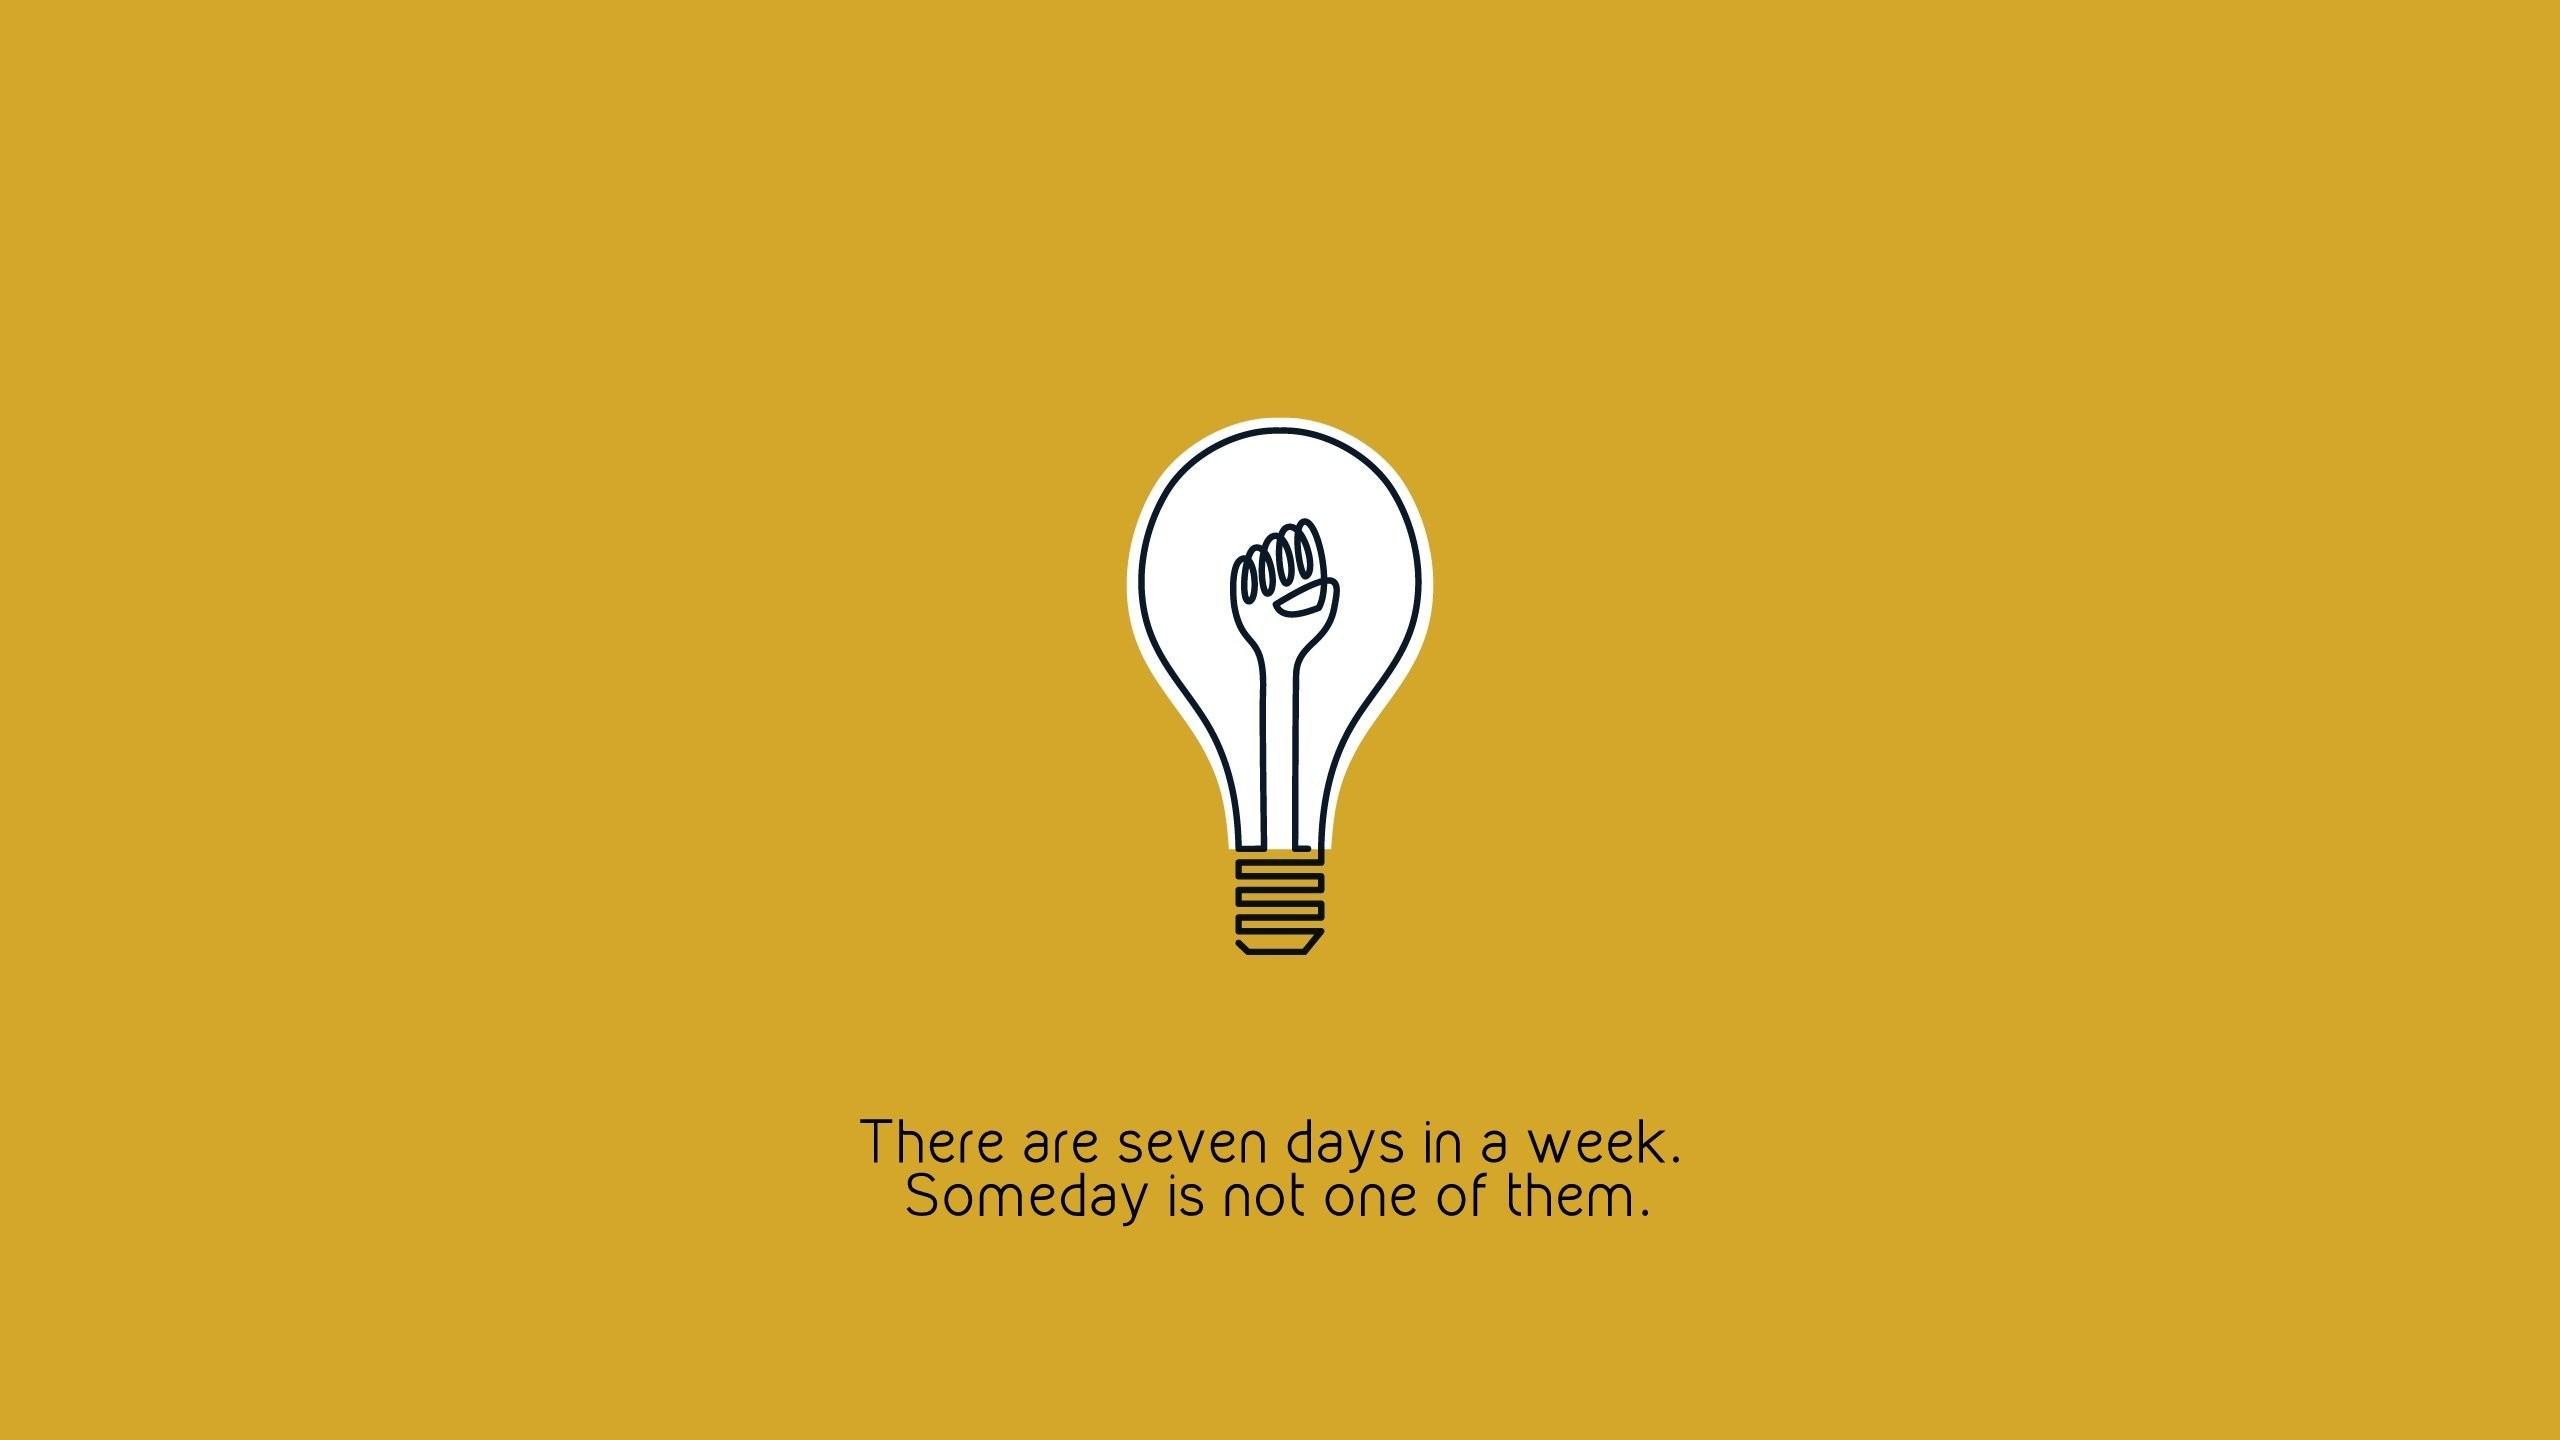 There are only 7 days in the week Wallpaper for Social Media YouTube Channel Art